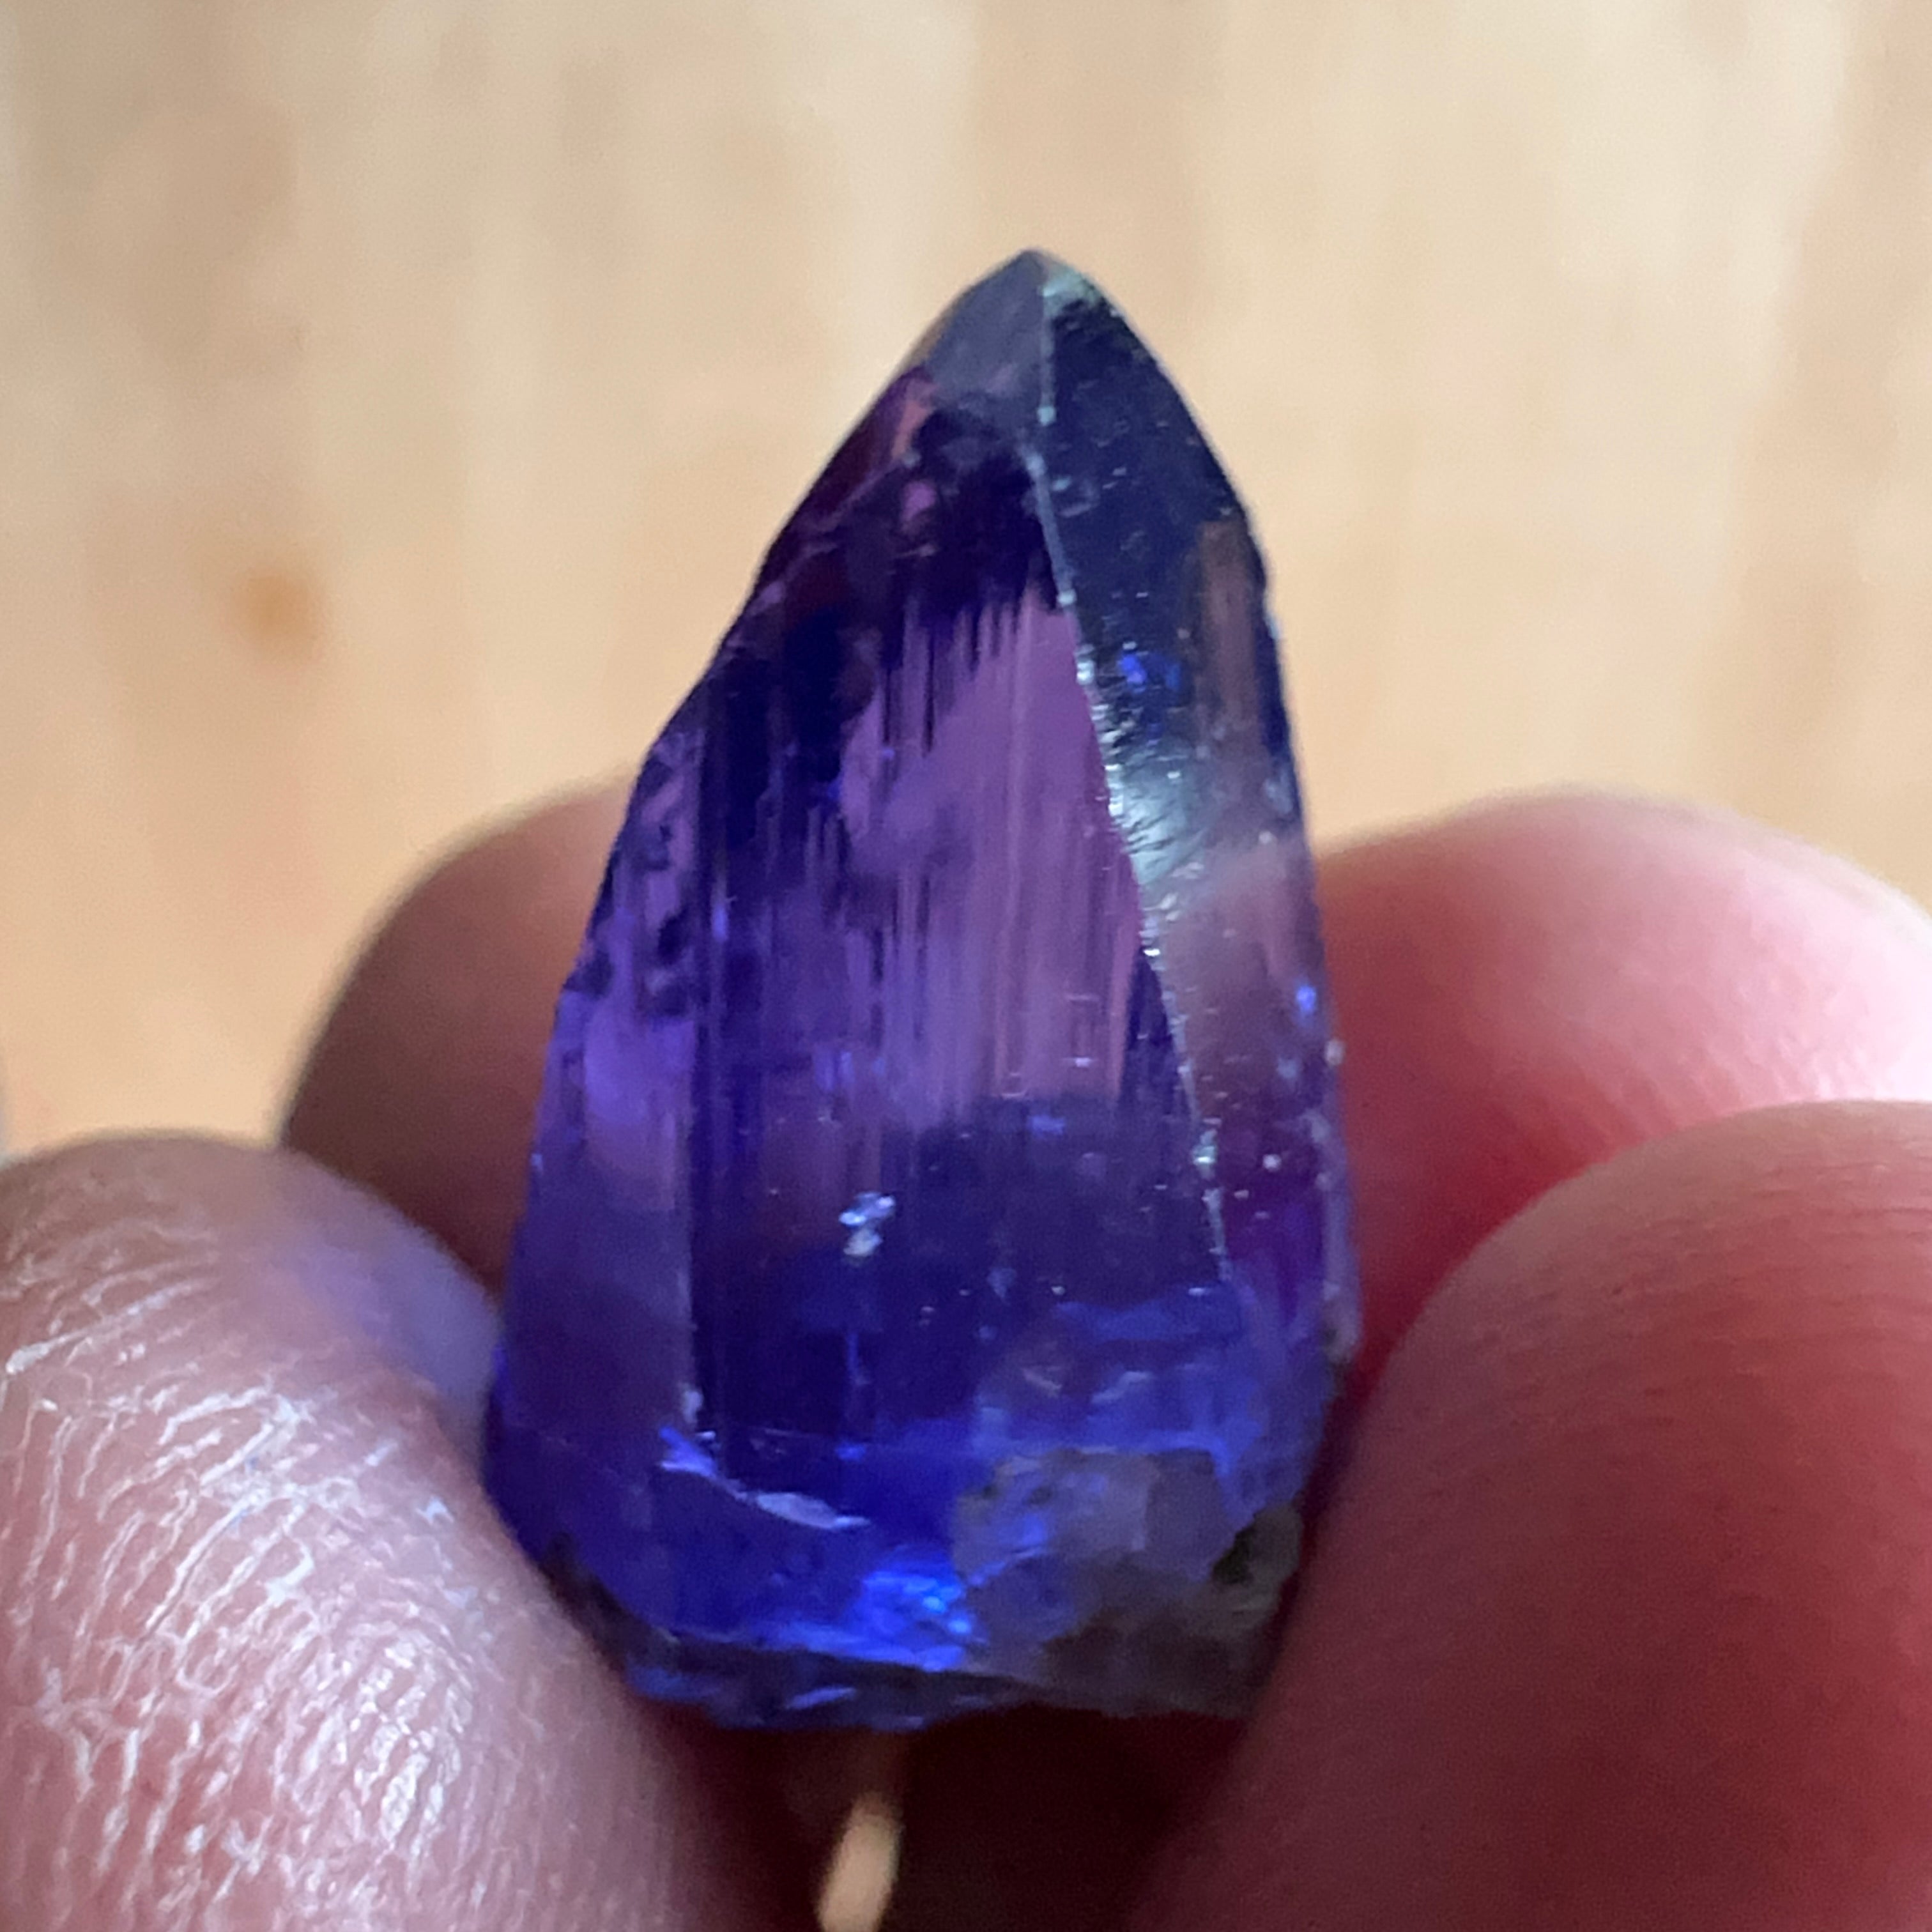 16.00ct Tanzanite Crystal, Merelani, Tanzania, Unheated Untreated, see the unheated brown at the bottom of the crystal